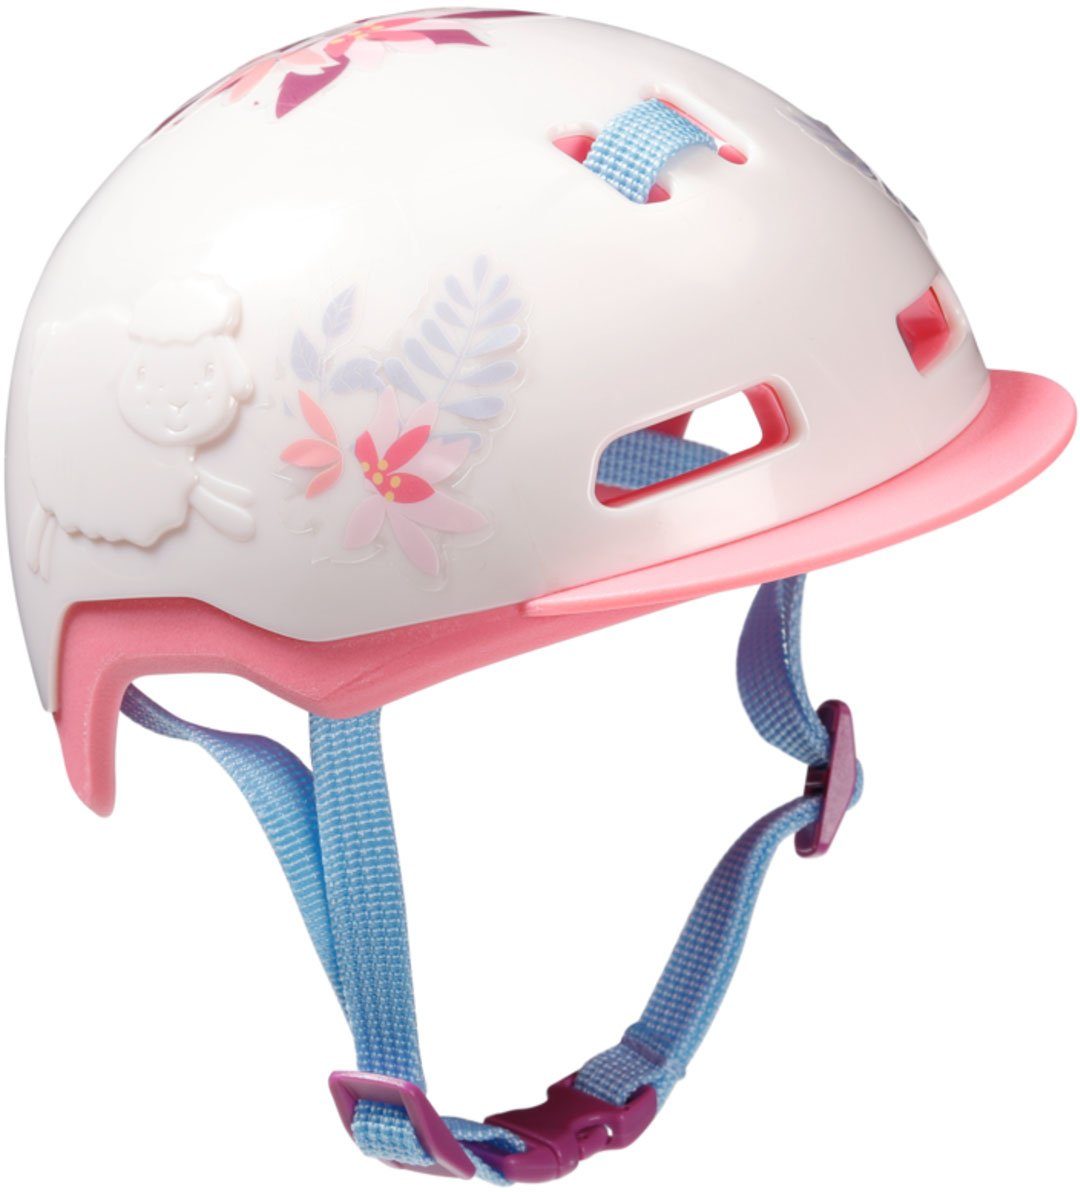 Fahrradhelm, Baby 43 Annabell cm Puppen Active Helm